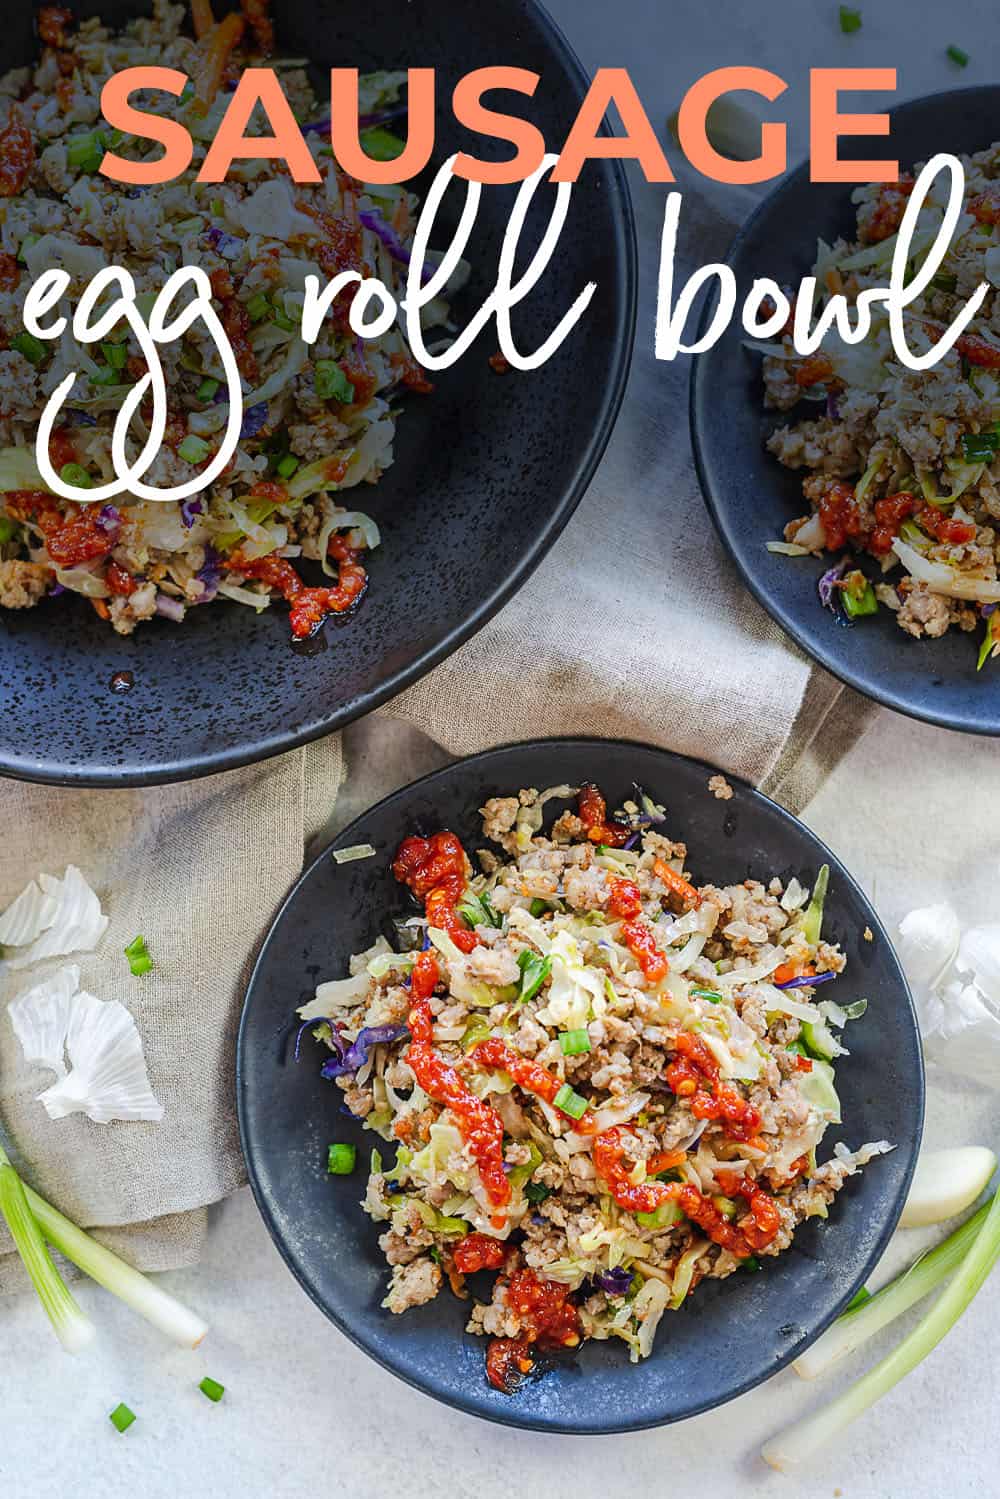 sausage egg roll in a bowl with text for Pinterest.